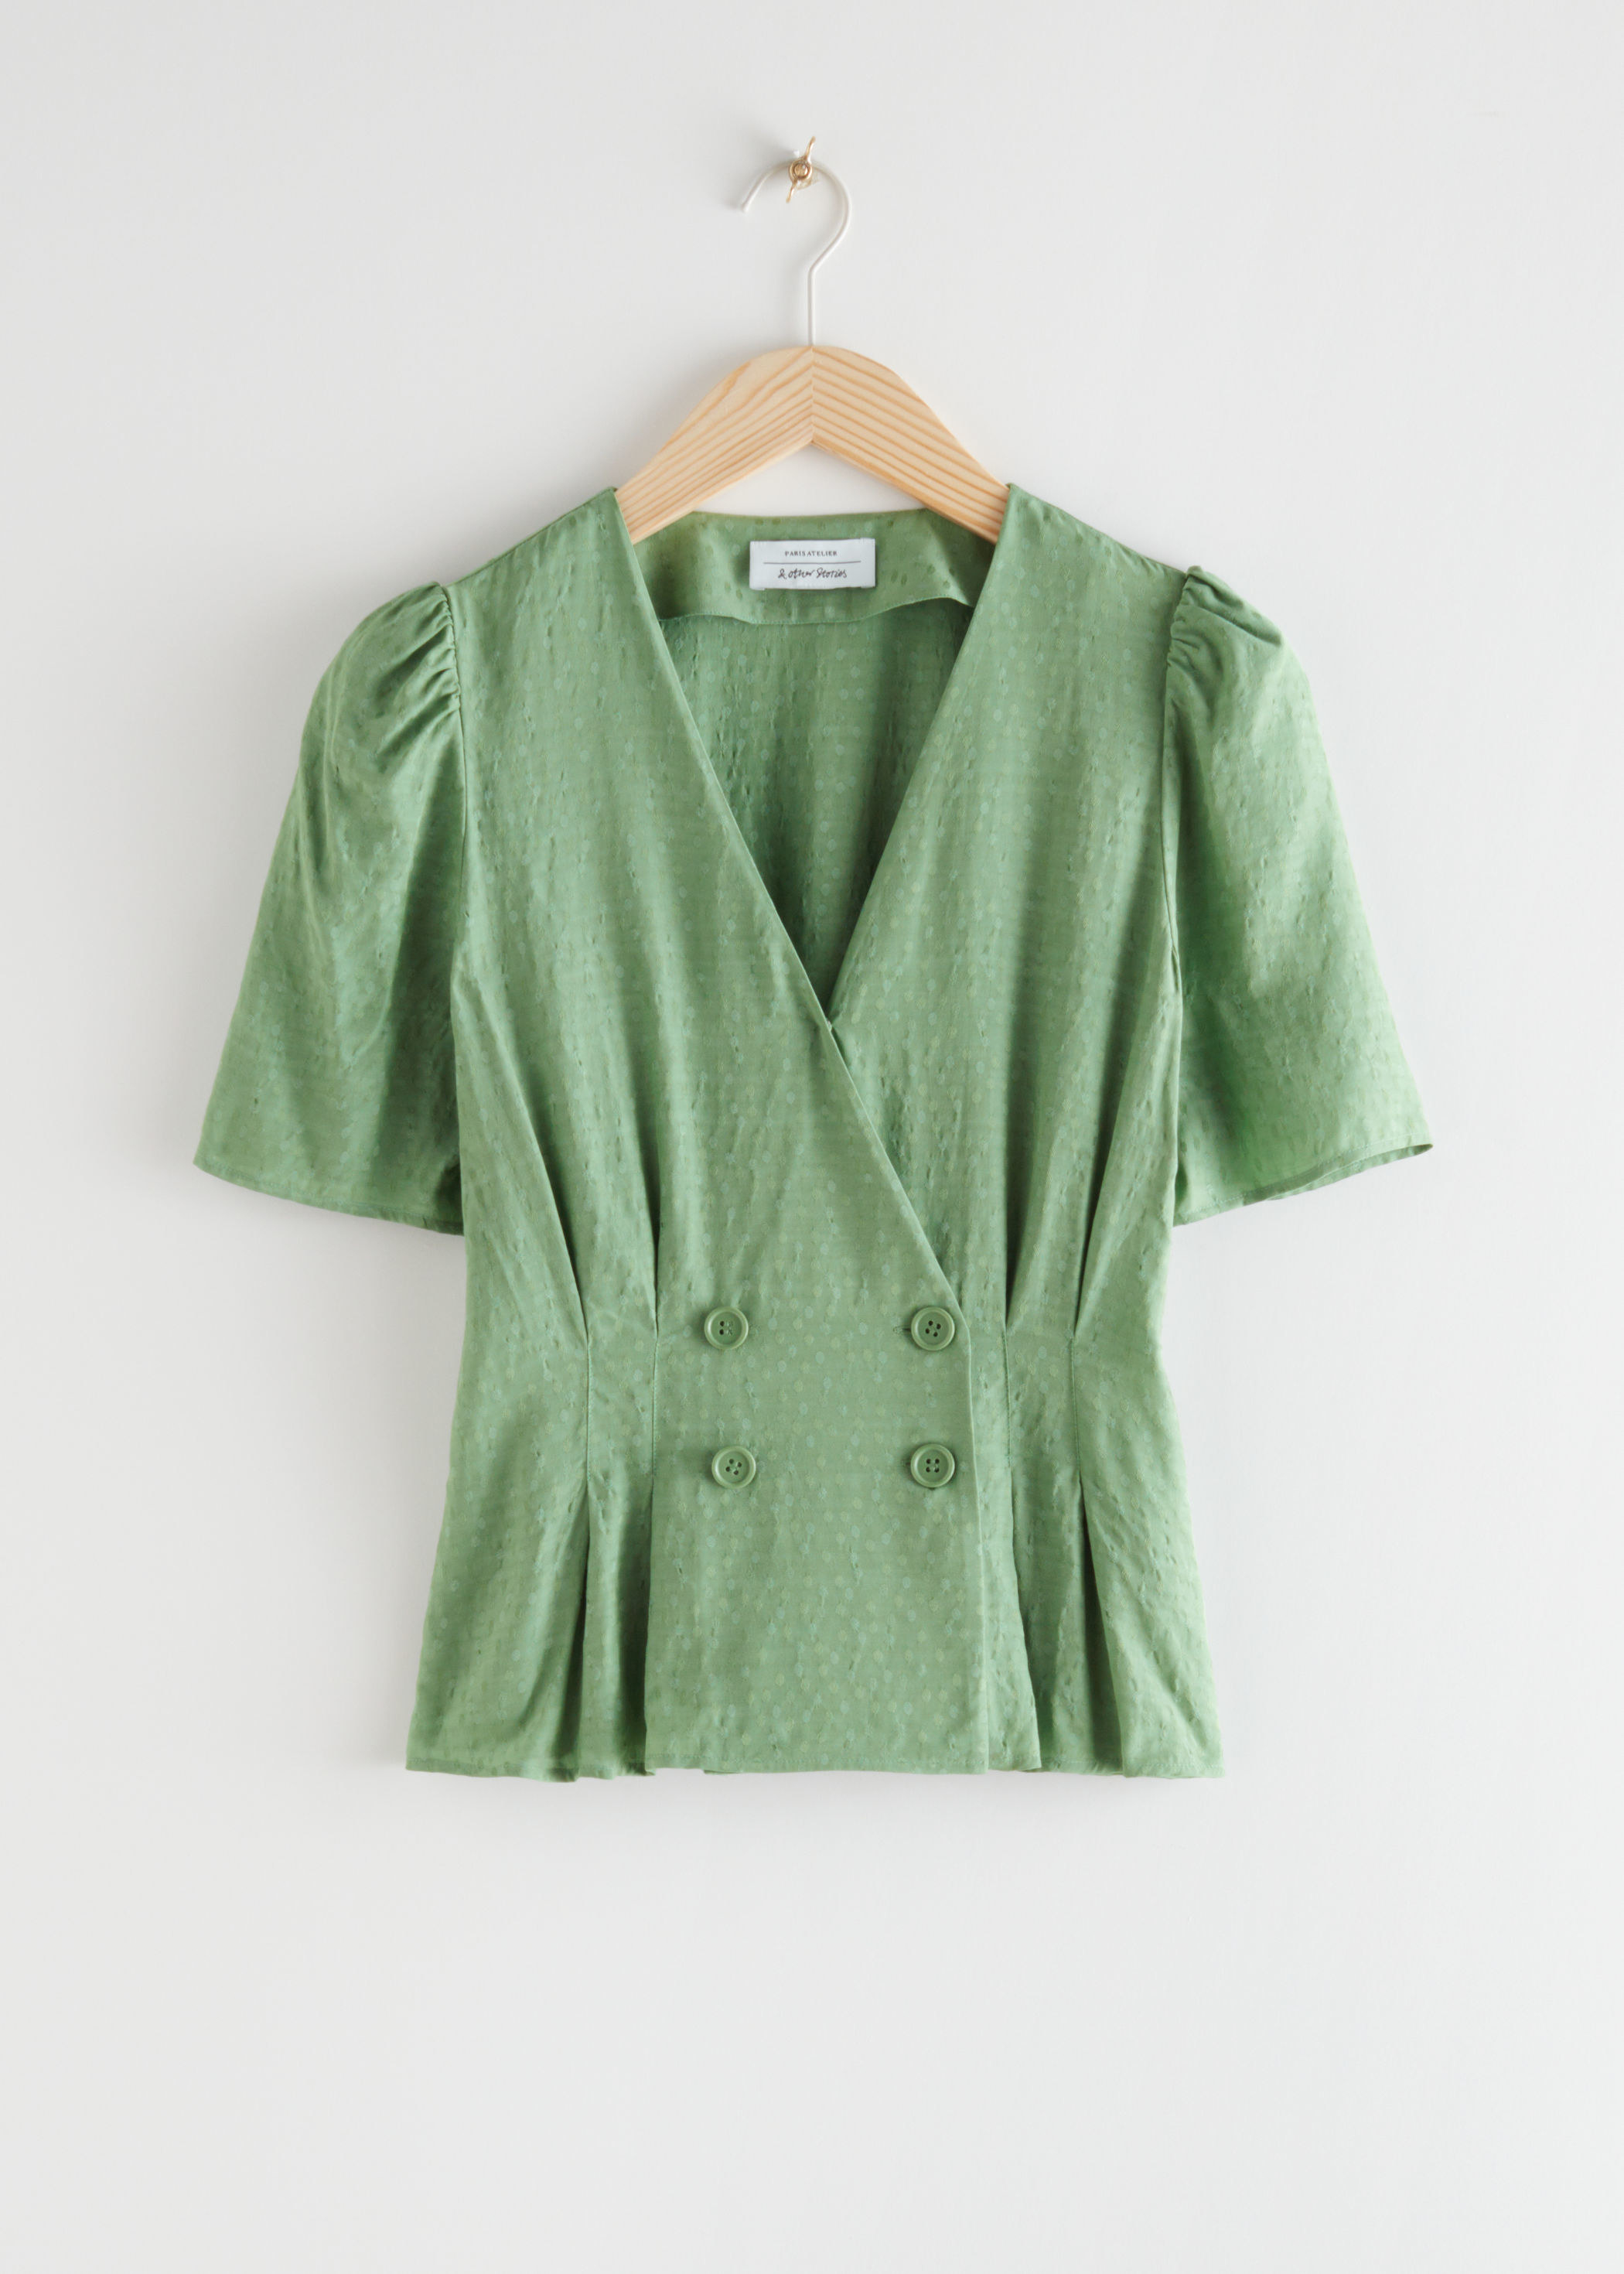  Other Stories wrap blouse in green